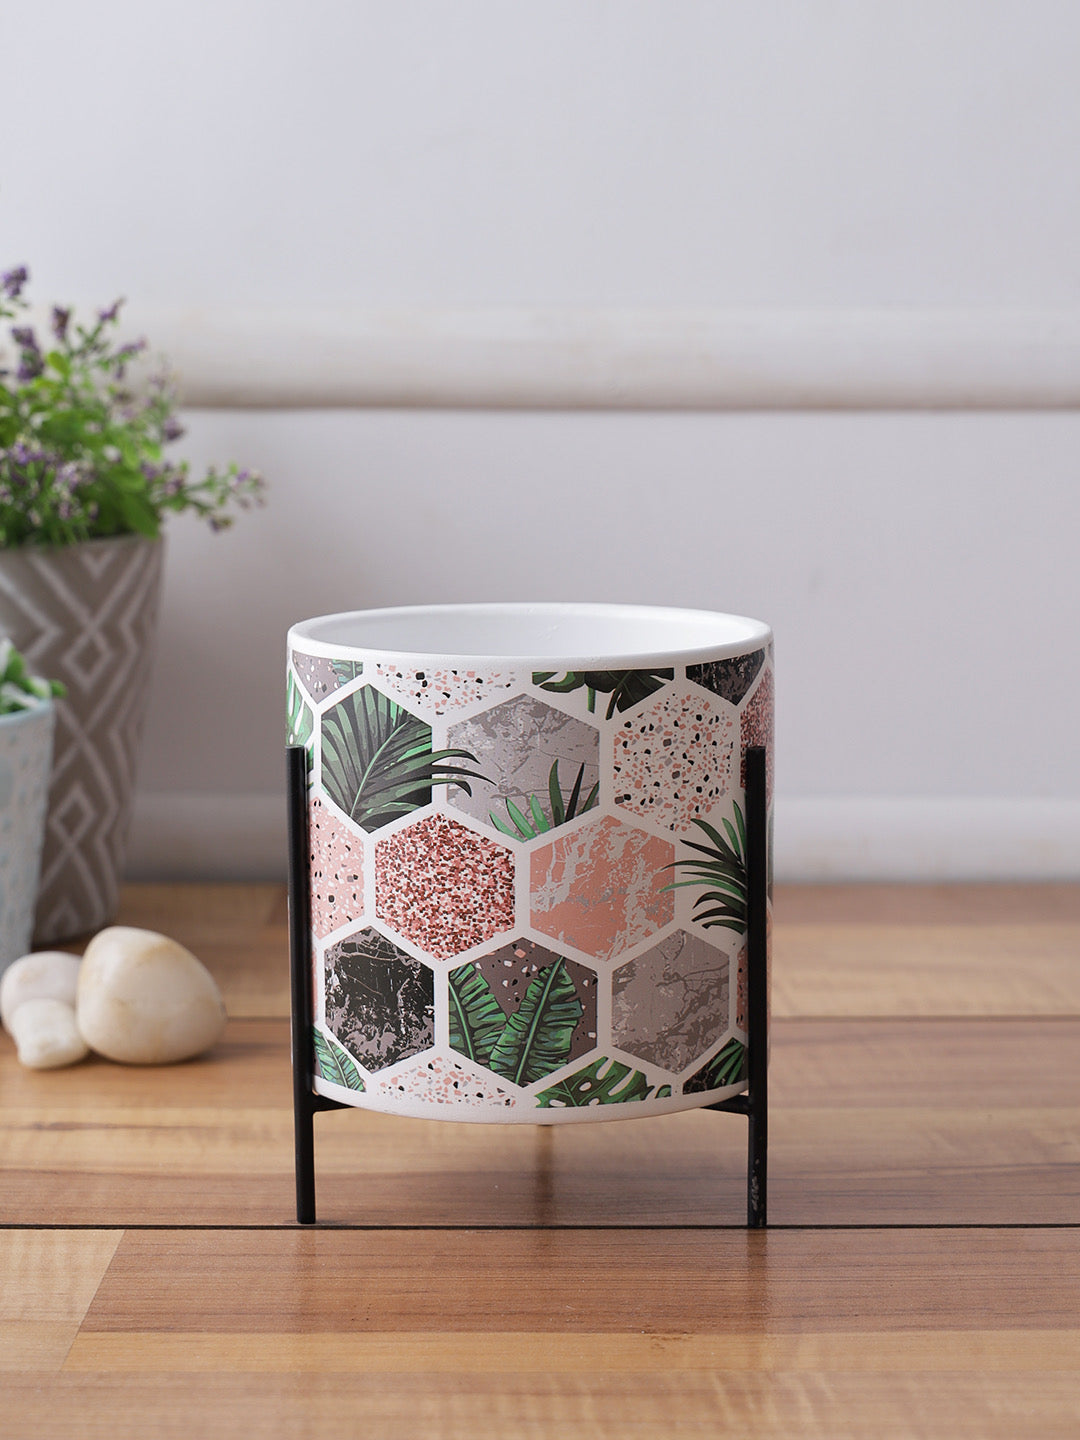 Honeycomb print Planter with Black Stand - Default Title (CH210039)